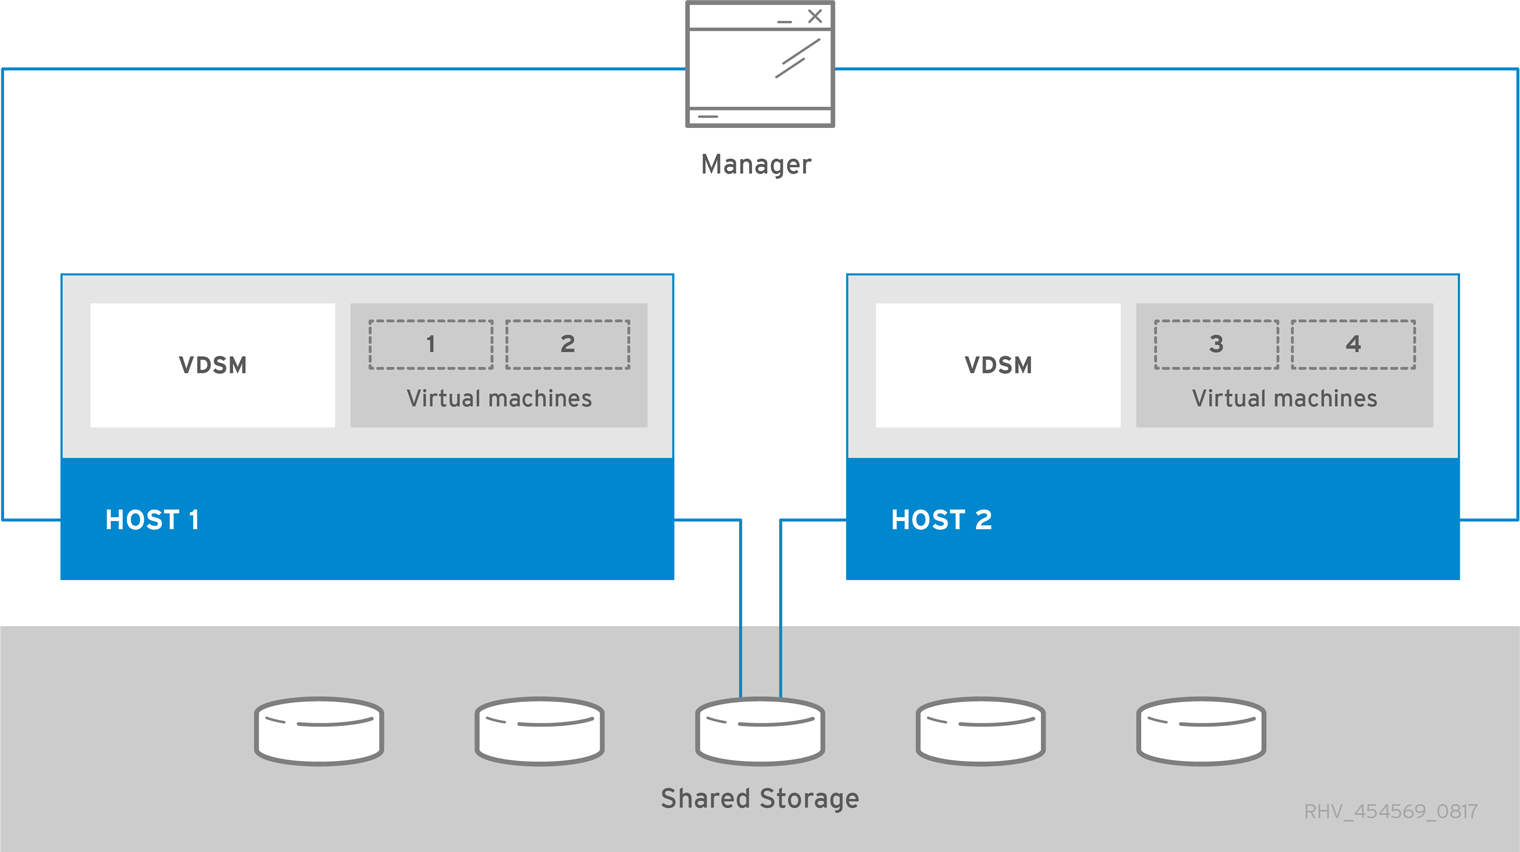 Standalone Manager Red Hat Virtualization Architecture